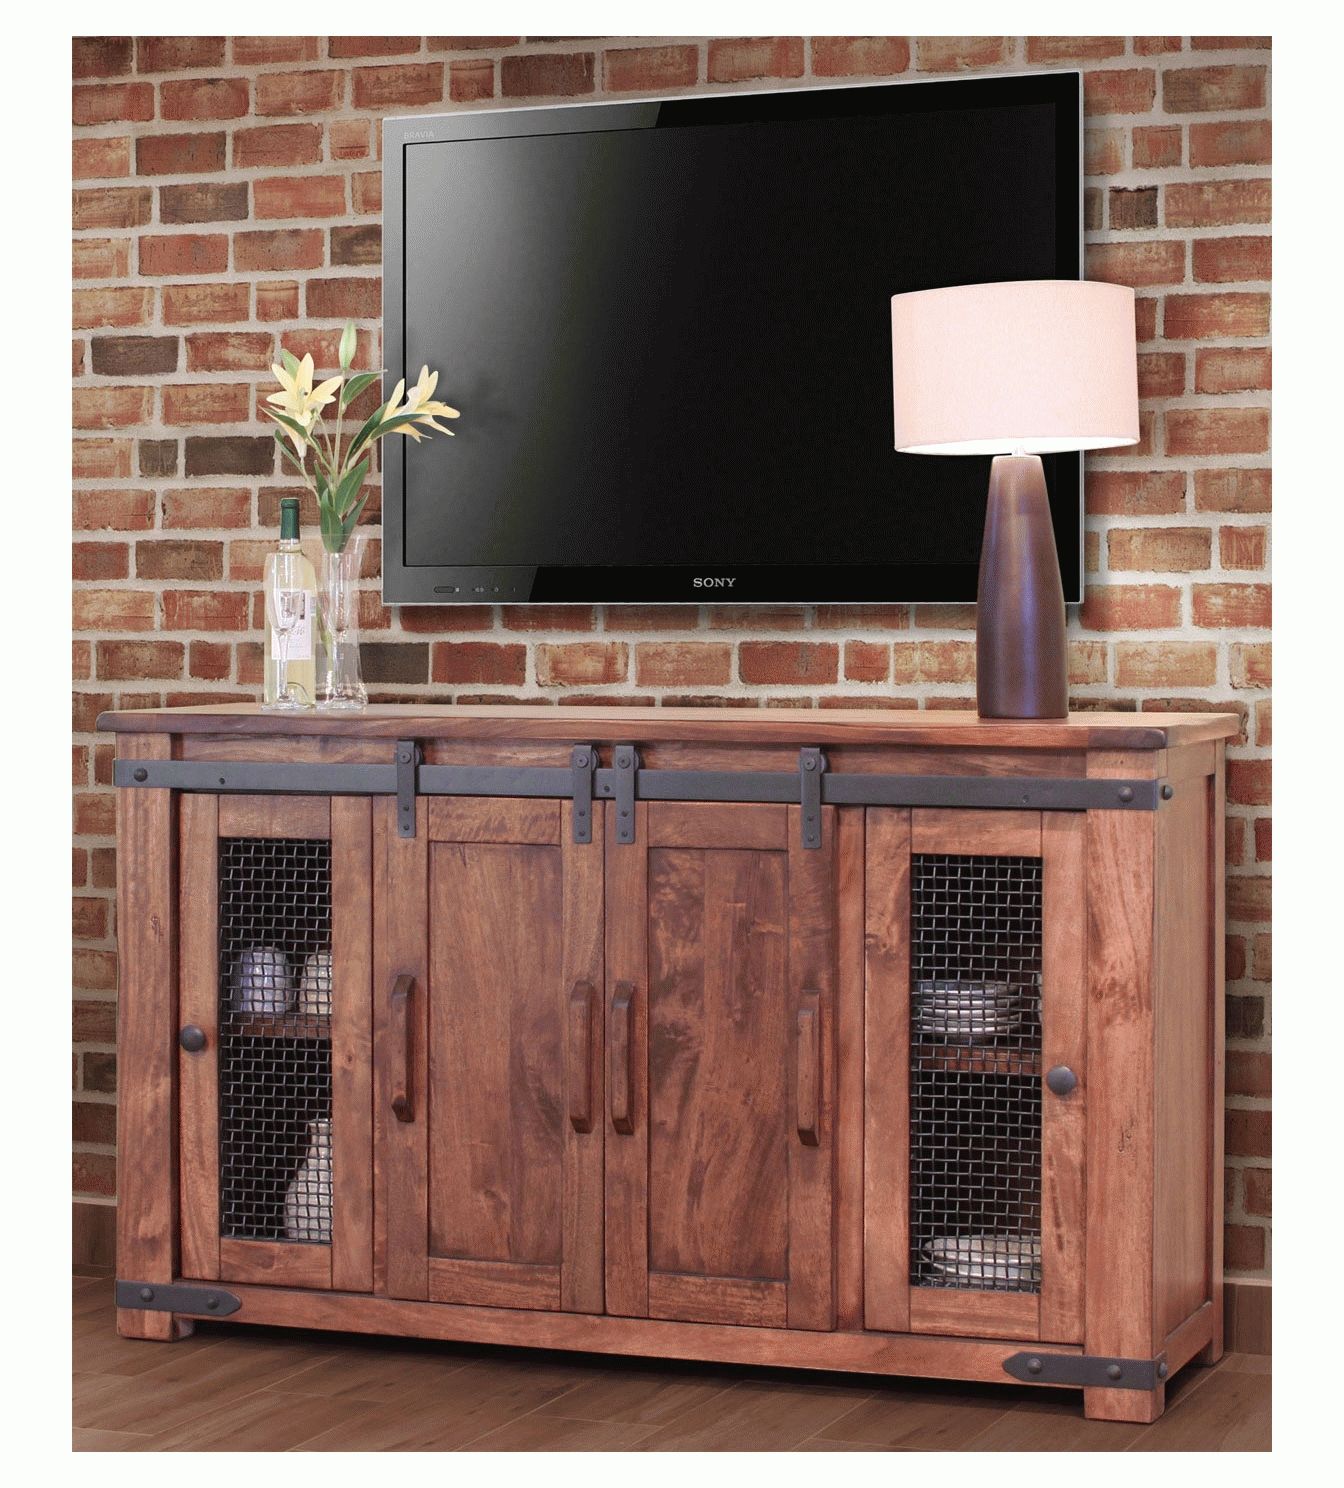 Rustic Barn Door Tv Stand, Barn Door Tv Stand, Barn Door Tv Console With Regard To Cheap Rustic Tv Stands (View 2 of 15)